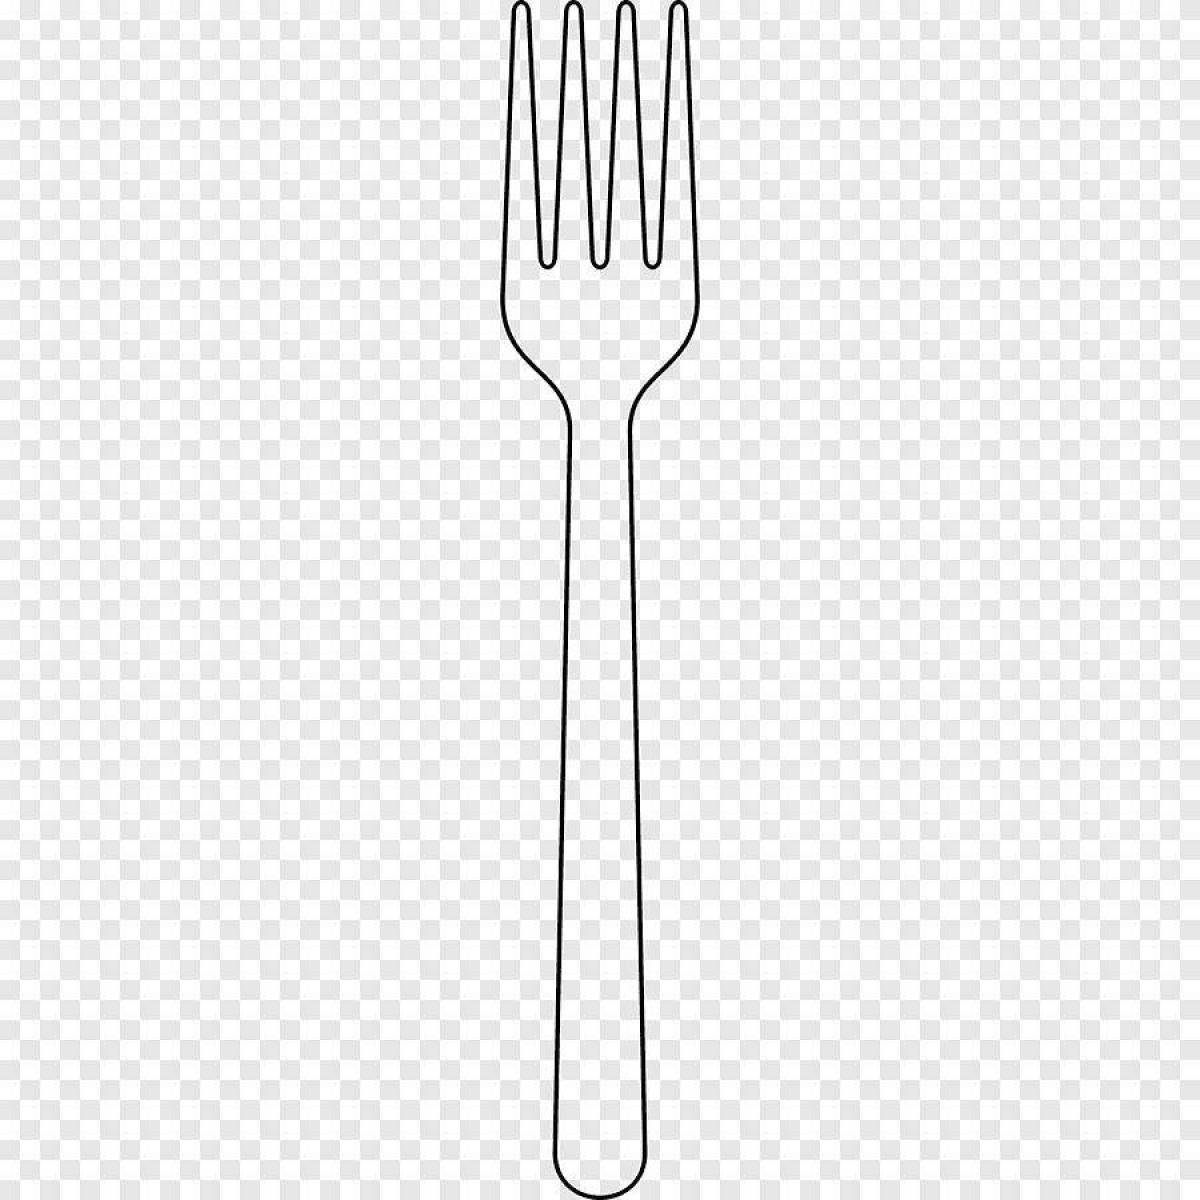 Bright fork coloring page